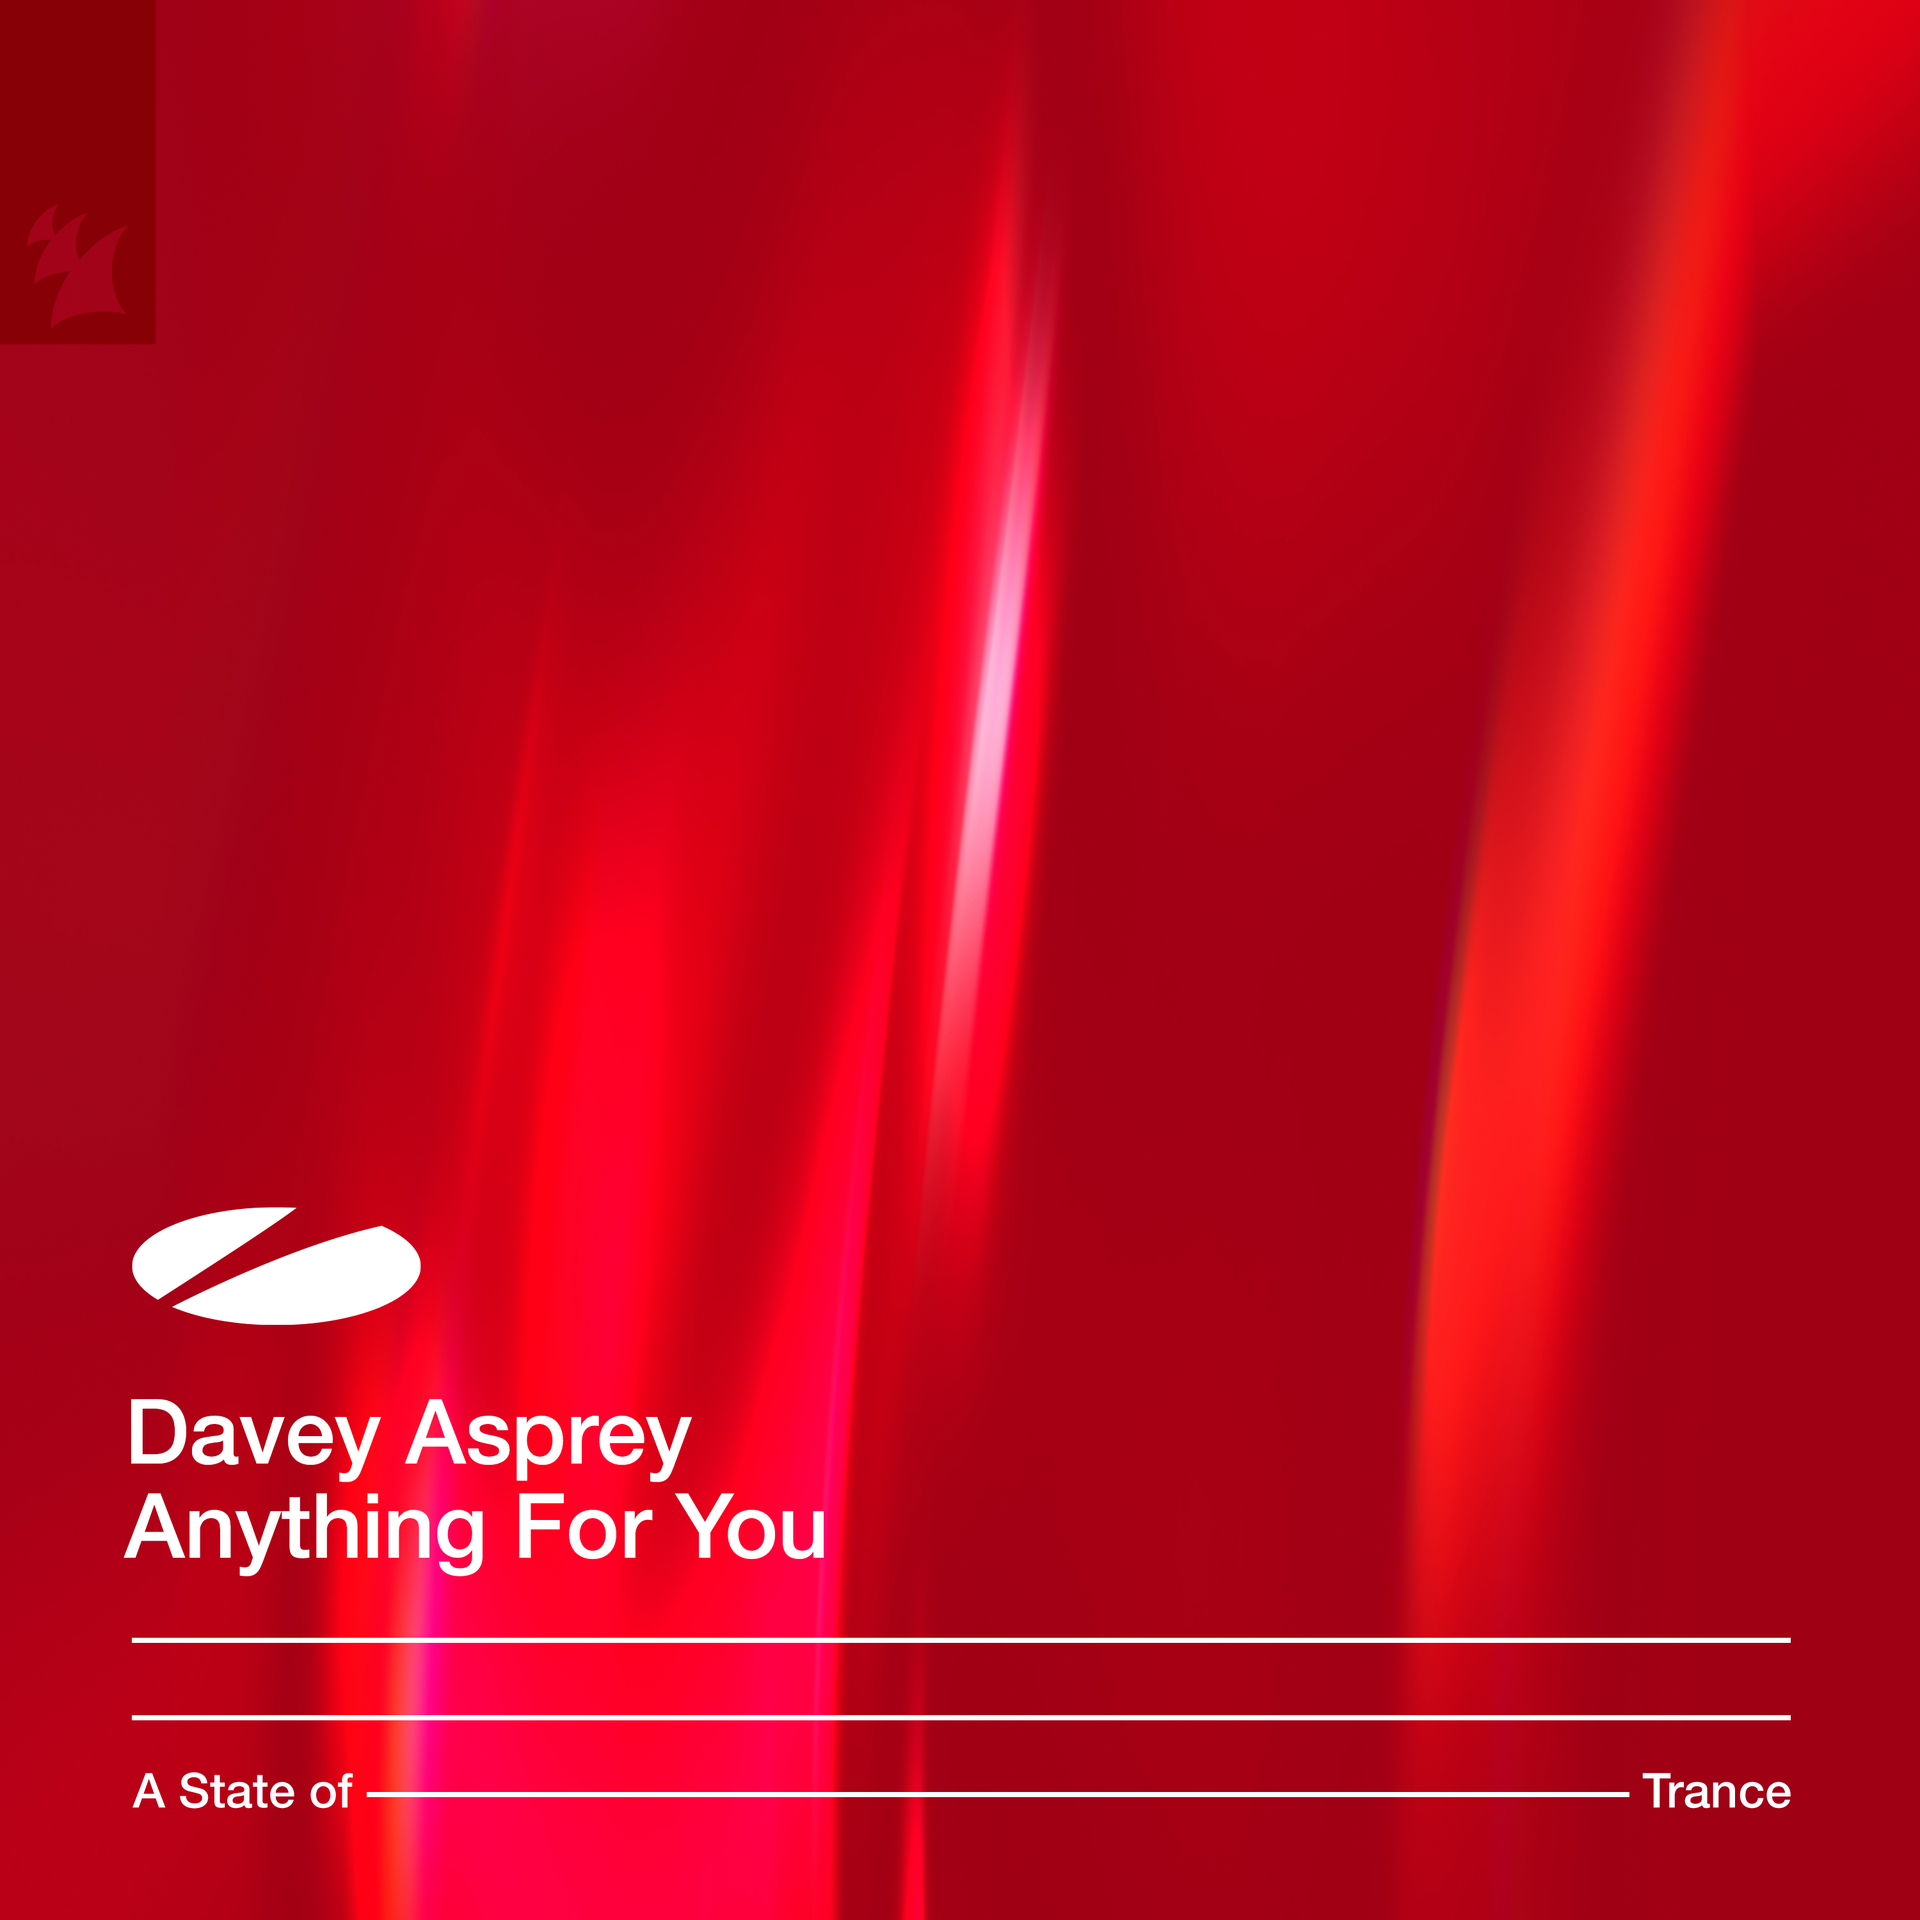 Davey Asprey presents Anything For You on A State Of Trance